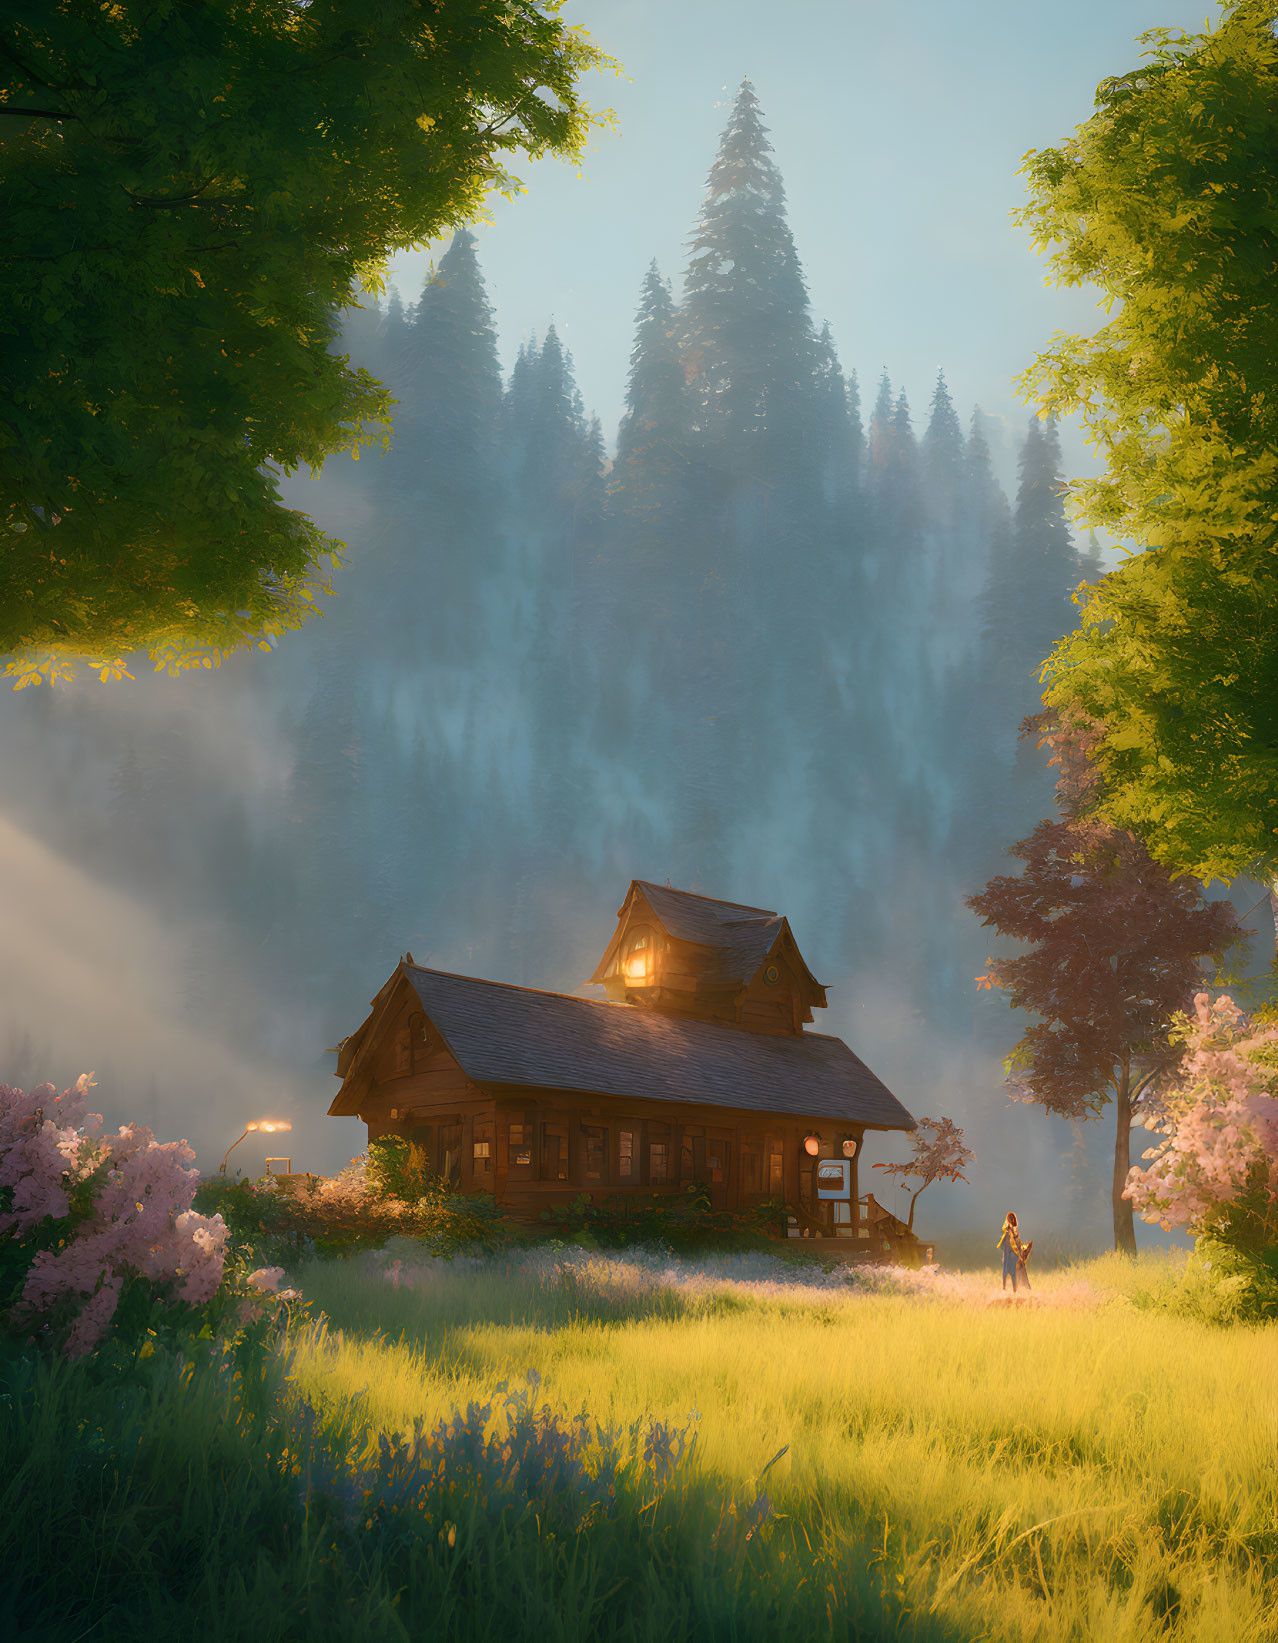 Cozy wooden cottage in blooming meadow with misty trees